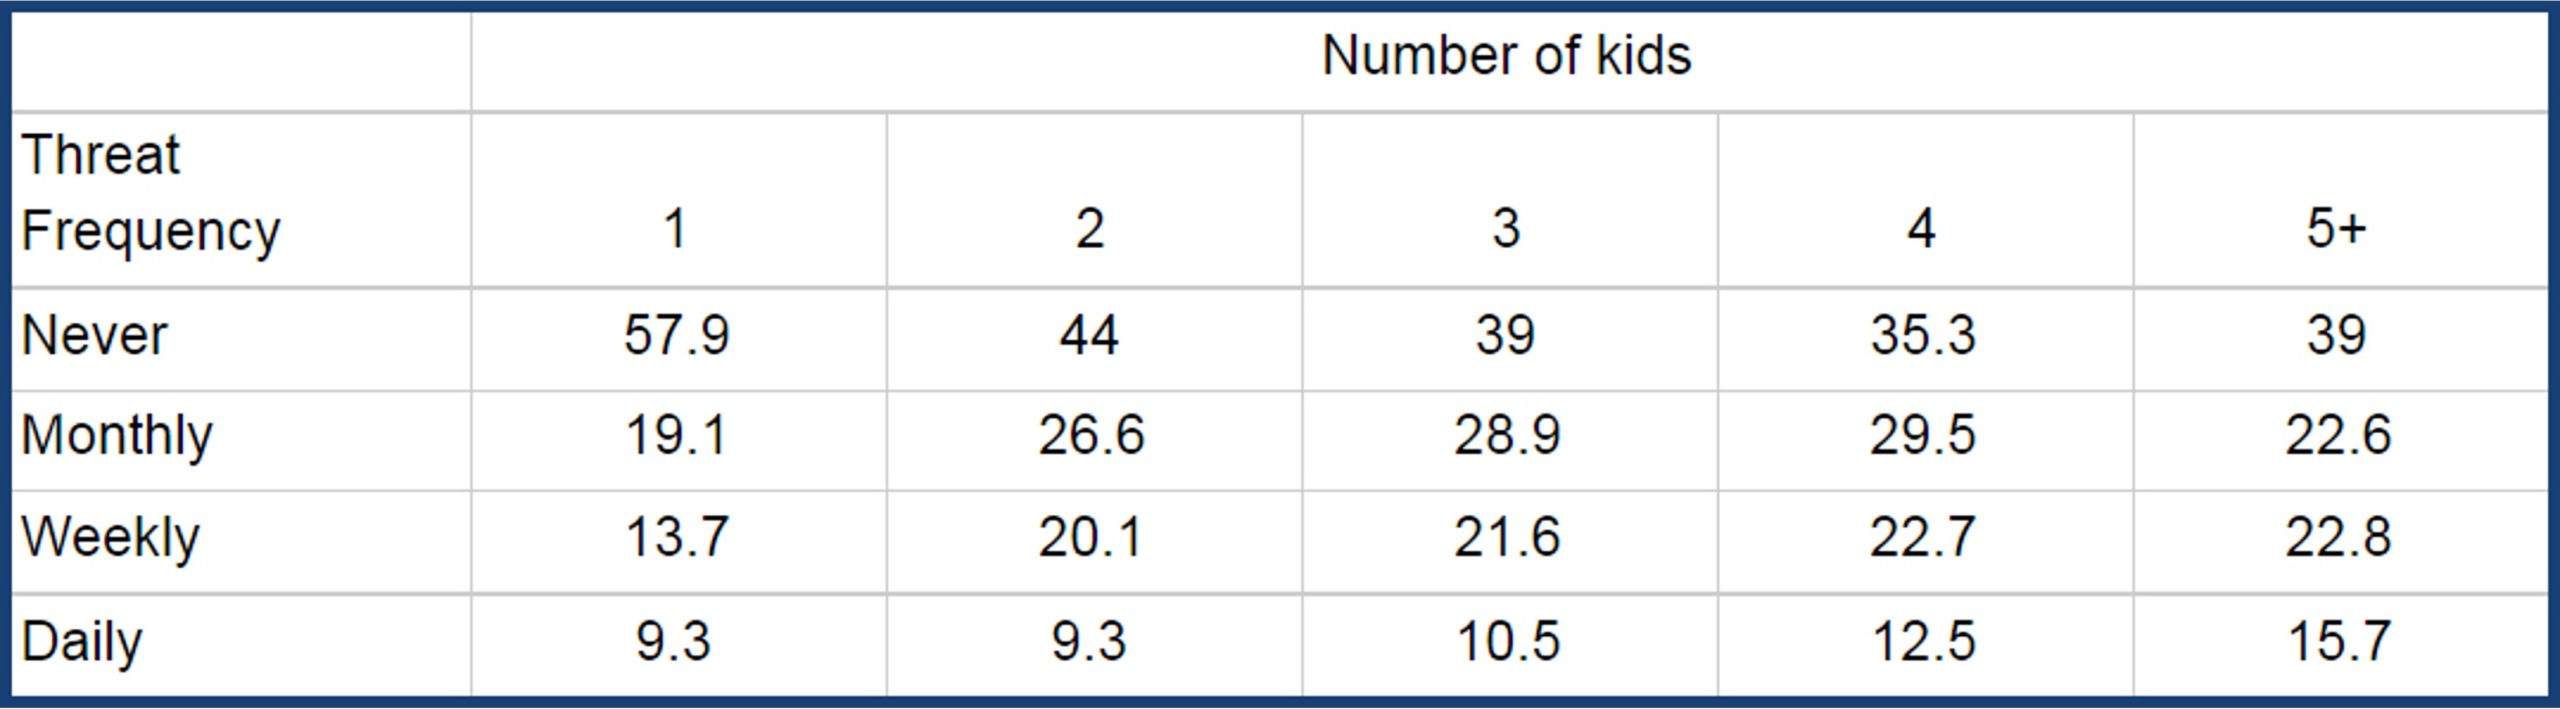 Number of kids vs threat frequent chart